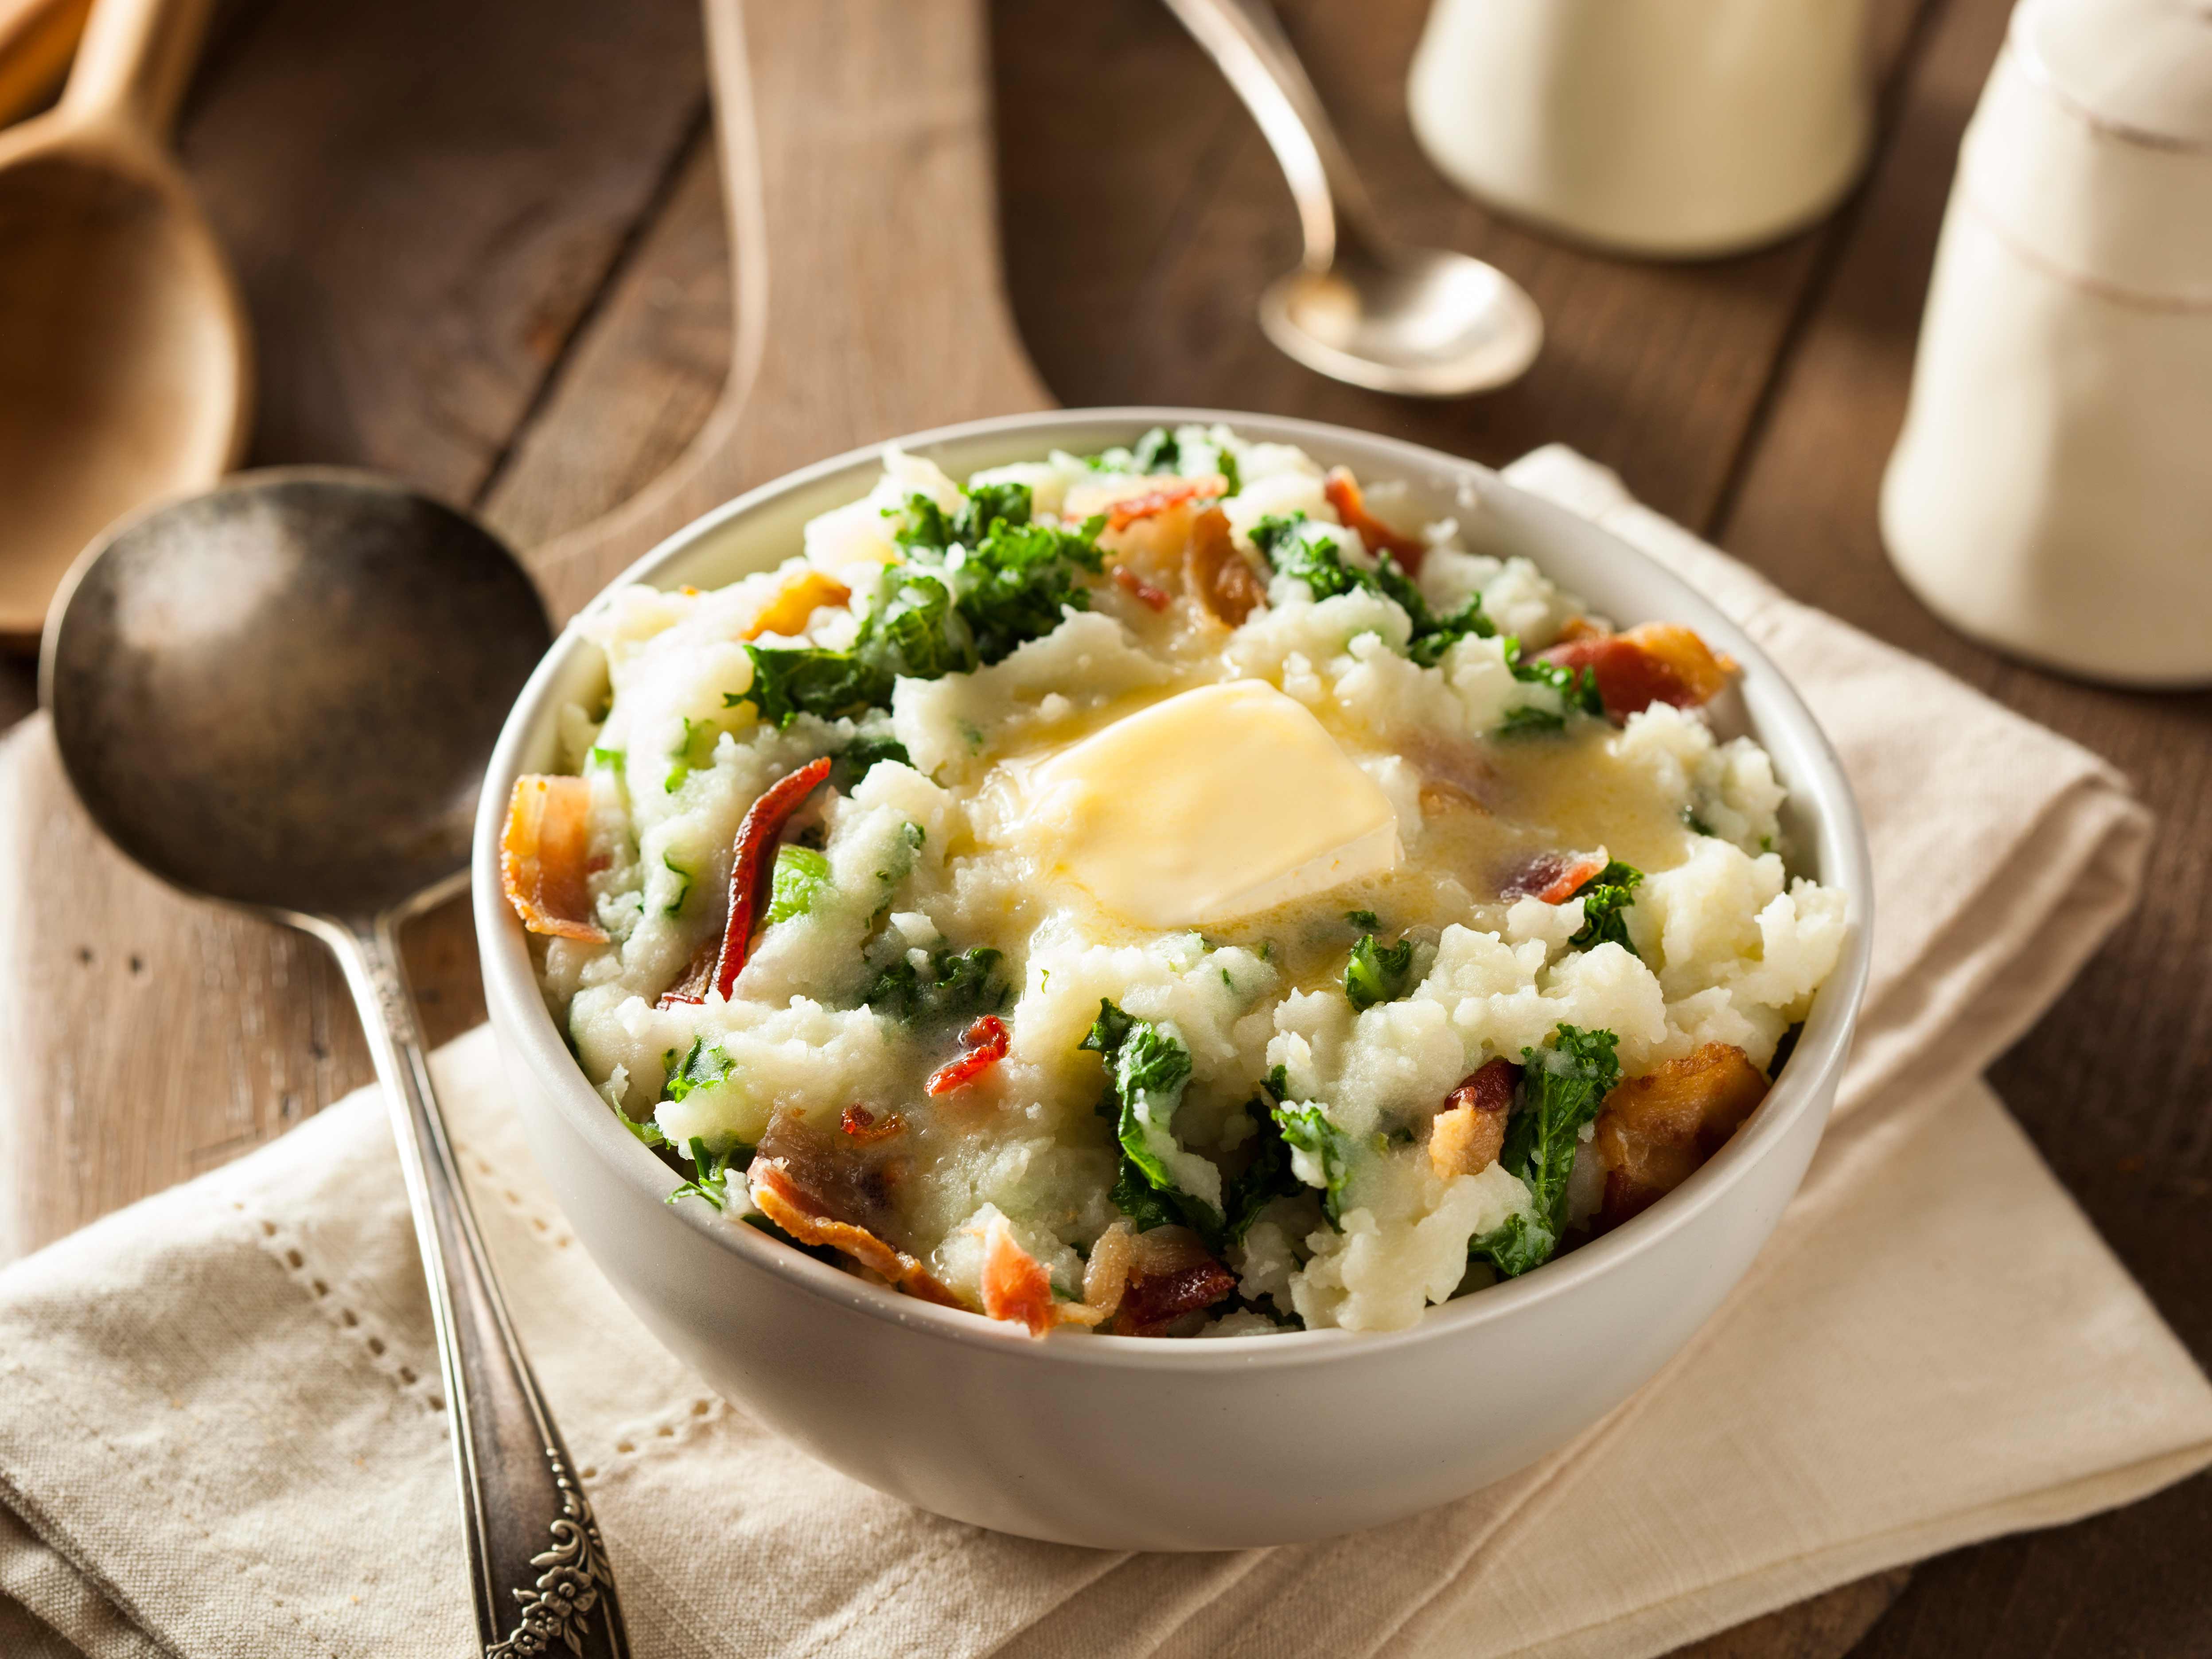 In the kitchen with Kelley: Irish colcannon